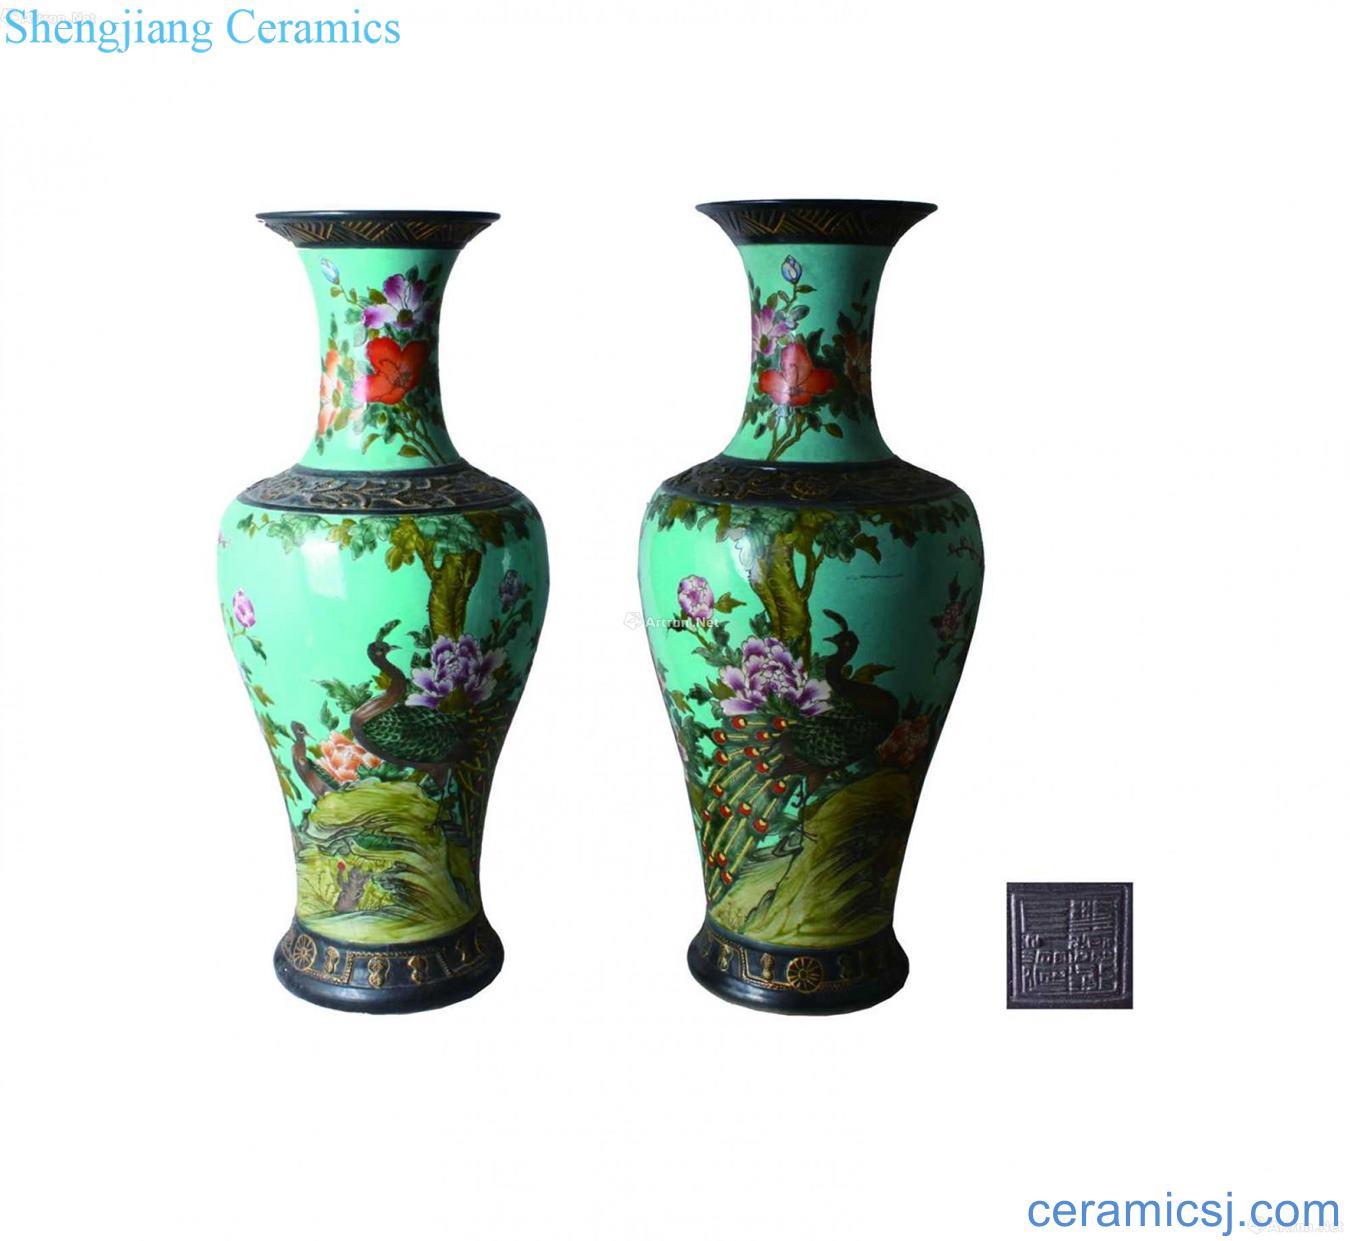 Long green glaze painting of flowers and a bottle mouth